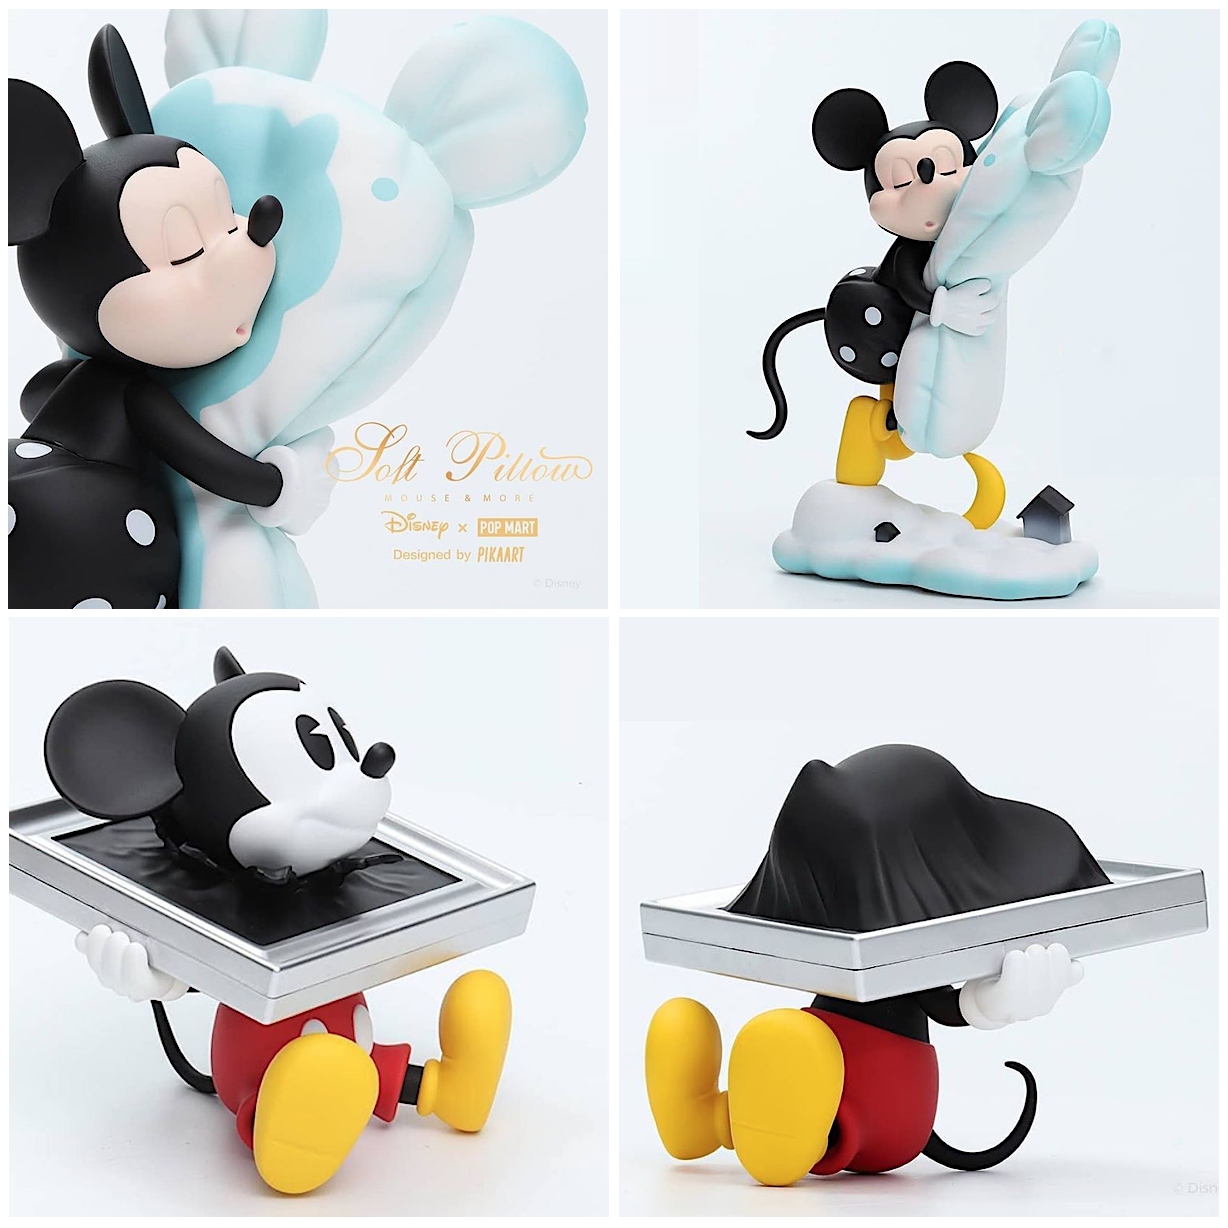 MICKEY THE BULKYZ ROBOT from Disney x POP MART (for July 15th Release)